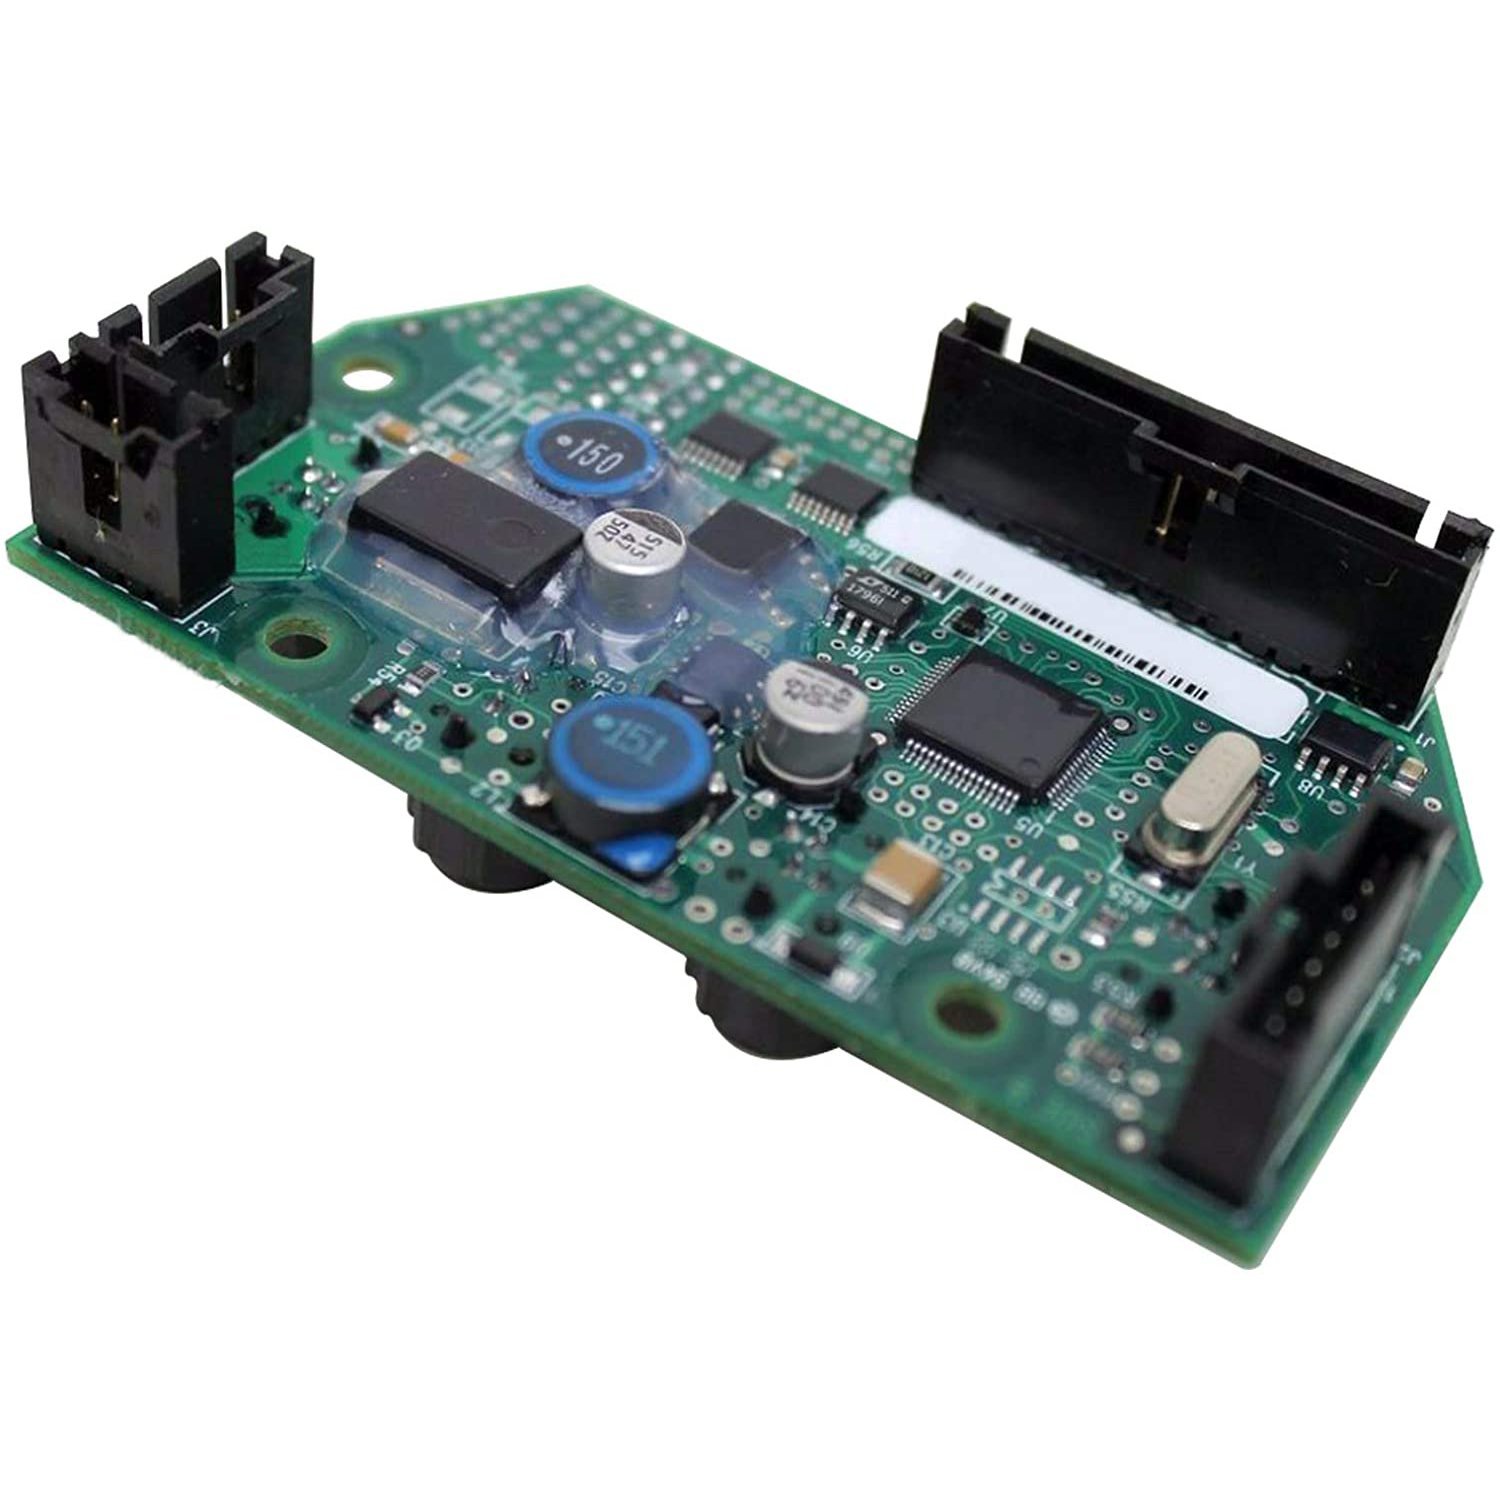 Circuit Board Assembly Platform Control 109503 109503GT Fit for Genie Gen 5 GR-12 GR-15 GR-20 GS-1530 GS-1532 GS-1930 GS-1932 GS-2032 GS-2046 GS-2632 GS-2646 GS-2668 DC GS-3232 GS-3246 - KUDUPARTS